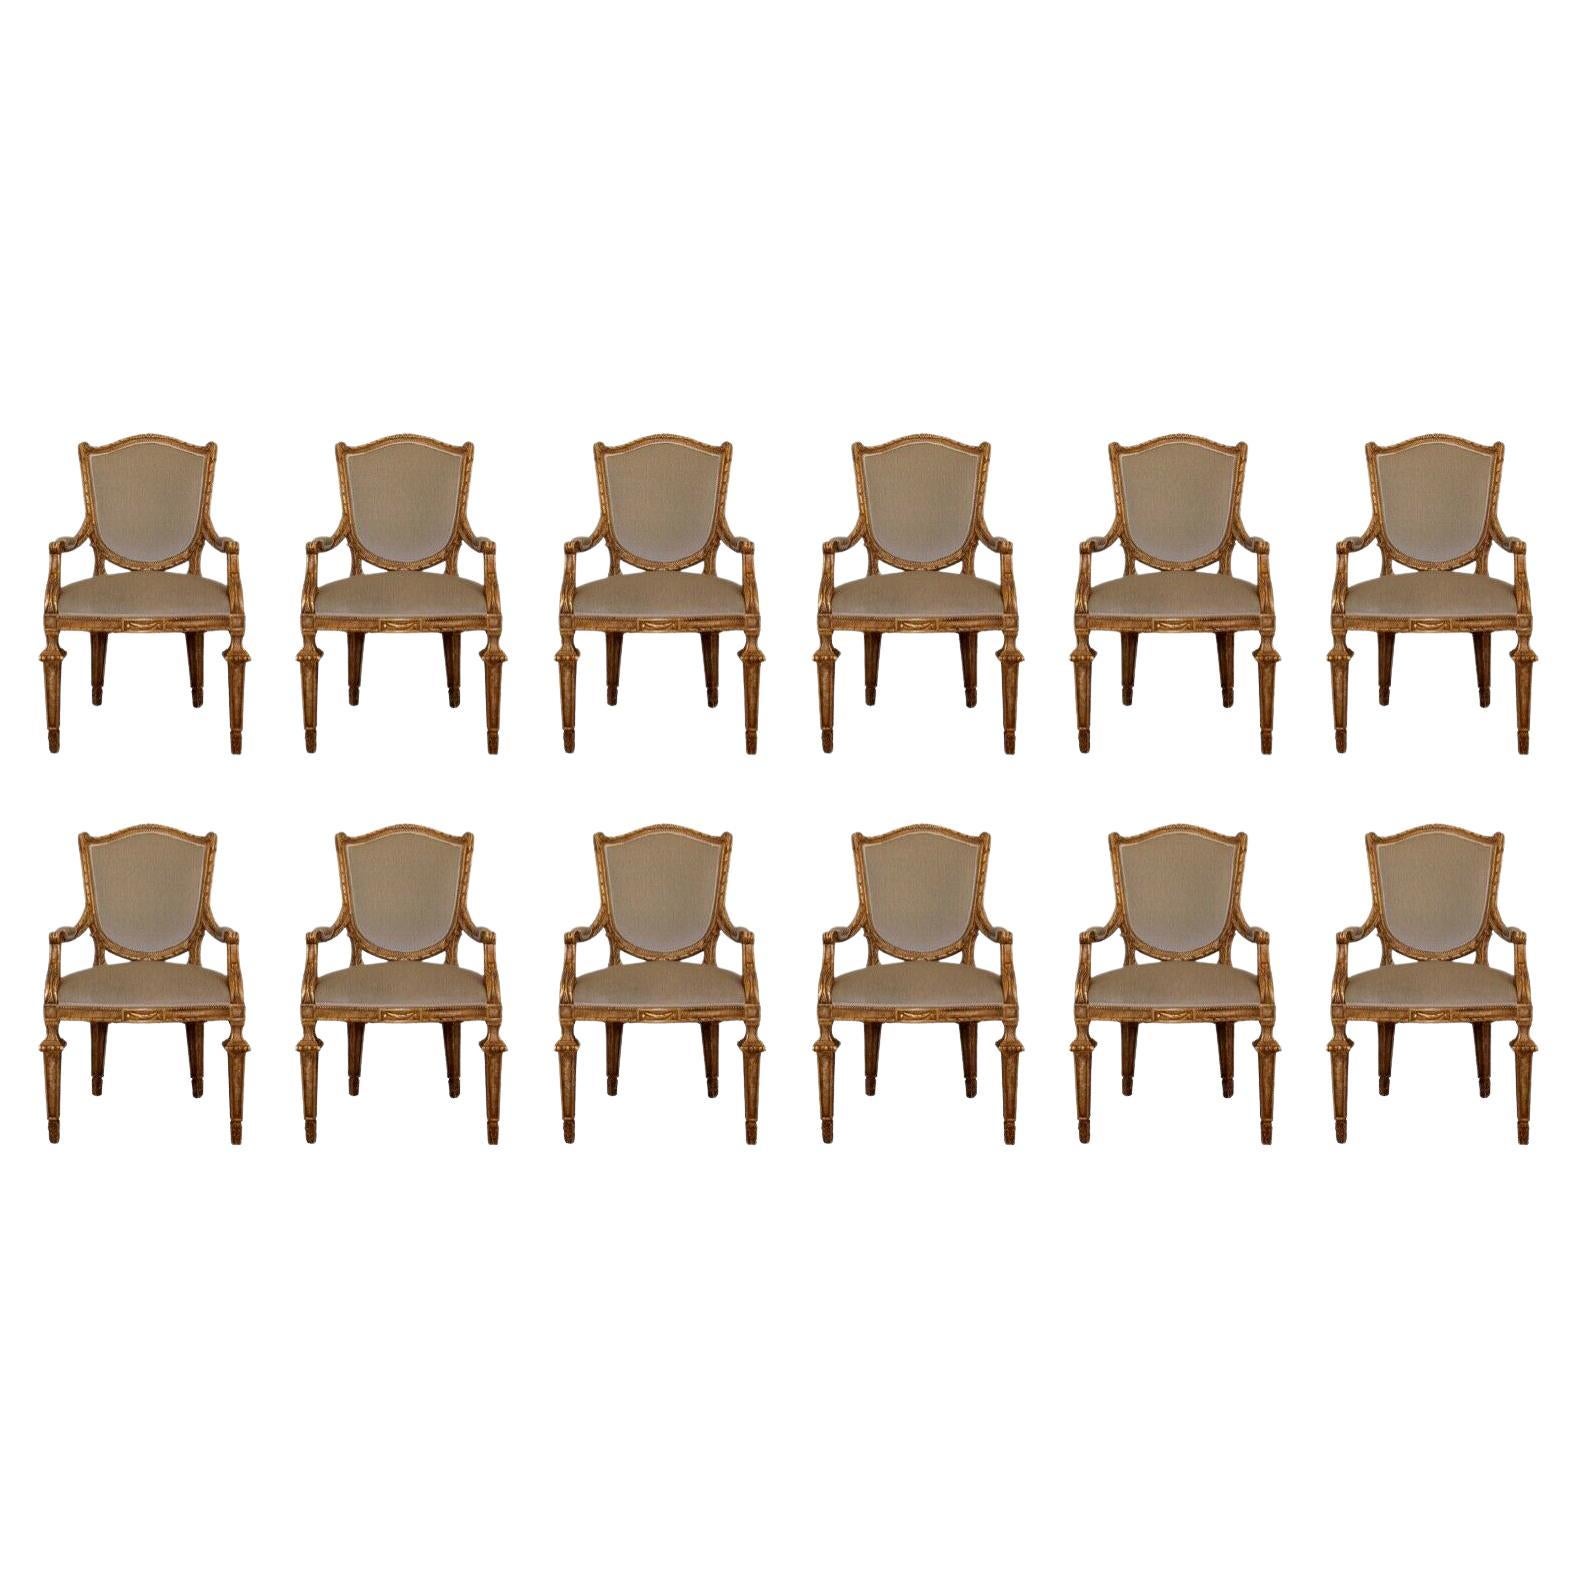 Set of 12 Baker Hollywood Regency Antique Gold Finish Armchairs Dining Chairs